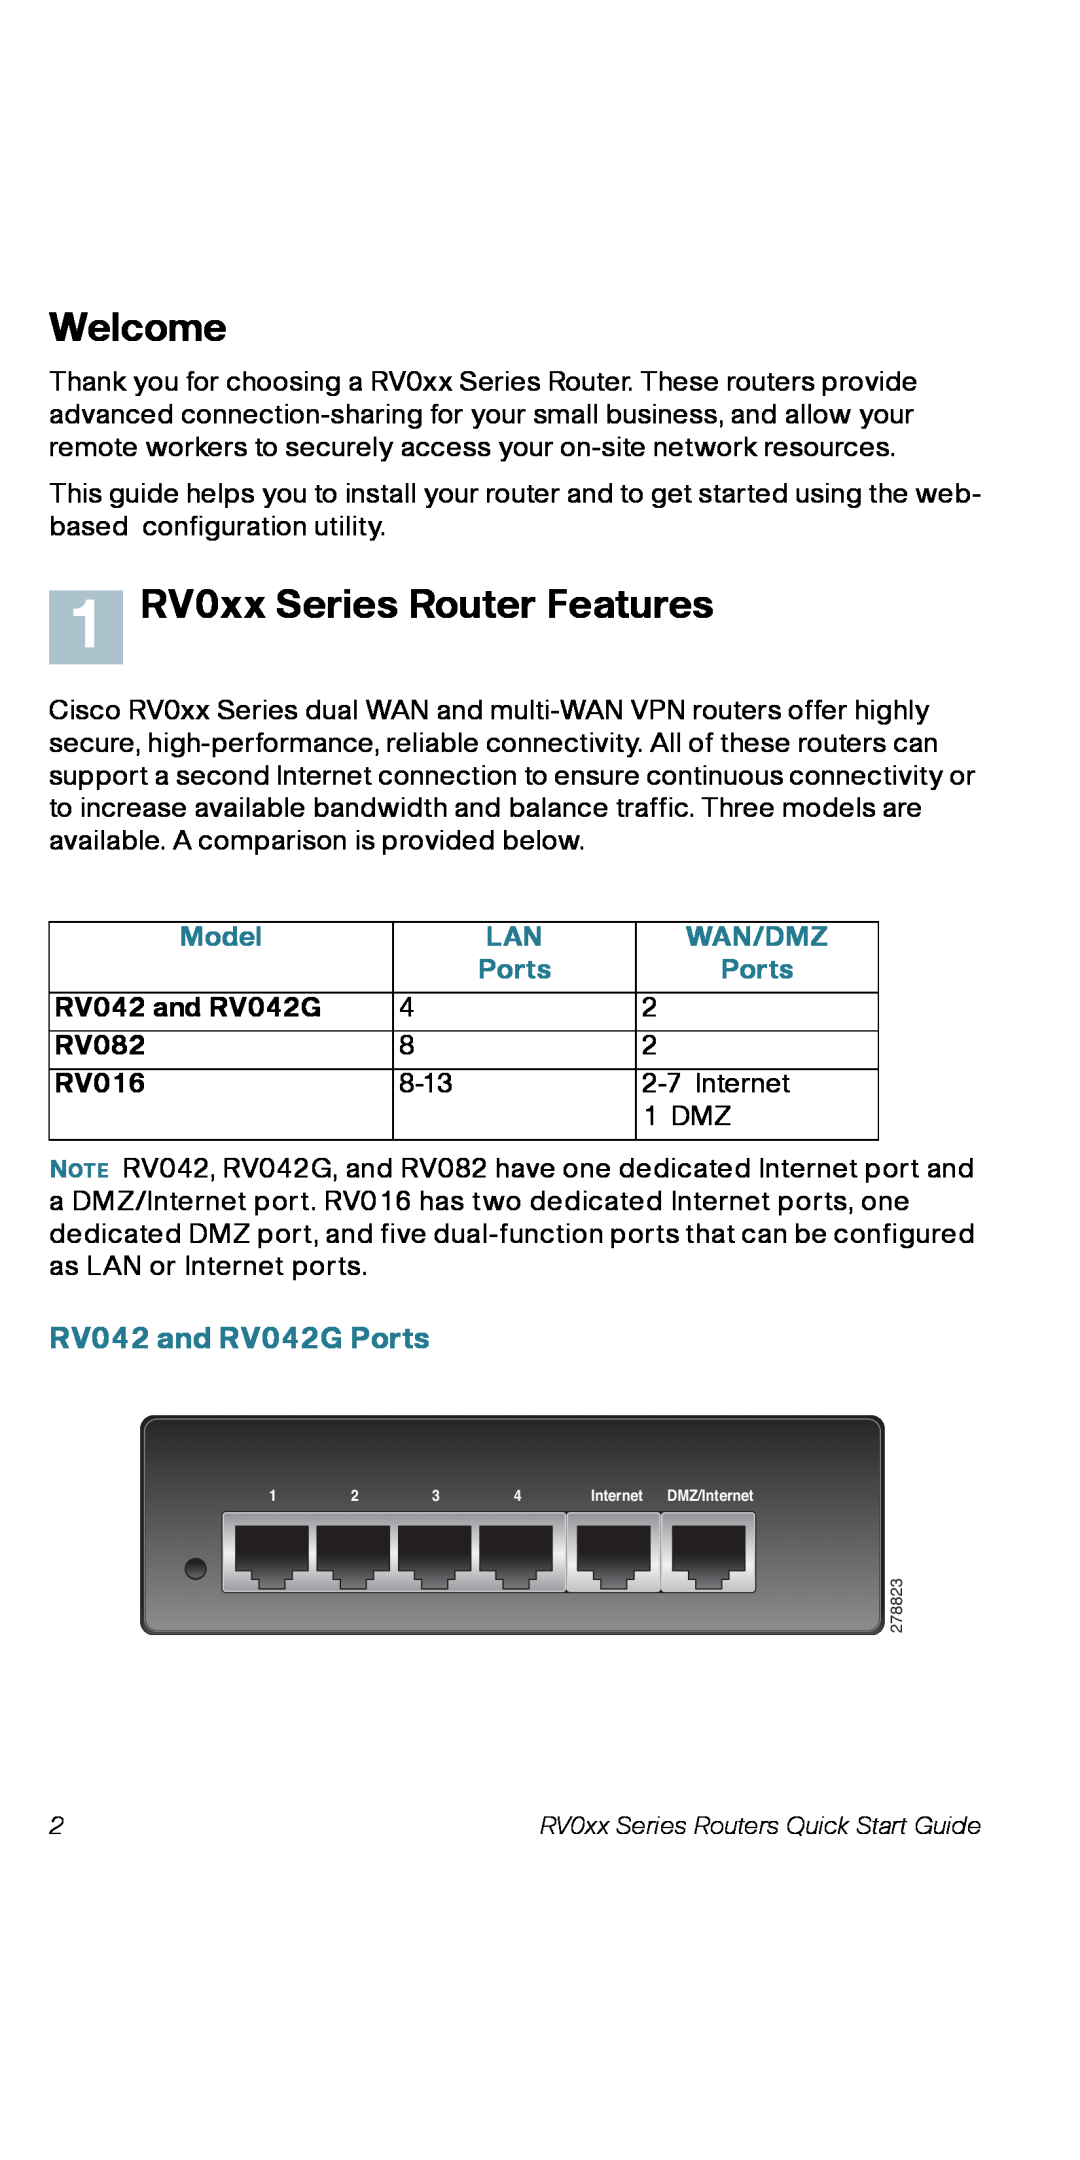 Cisco Systems RV082RF quick start Welcome, 1 RV0xx Series Router Features, RV042 and RV042G Ports, Model, Wan/Dmz 